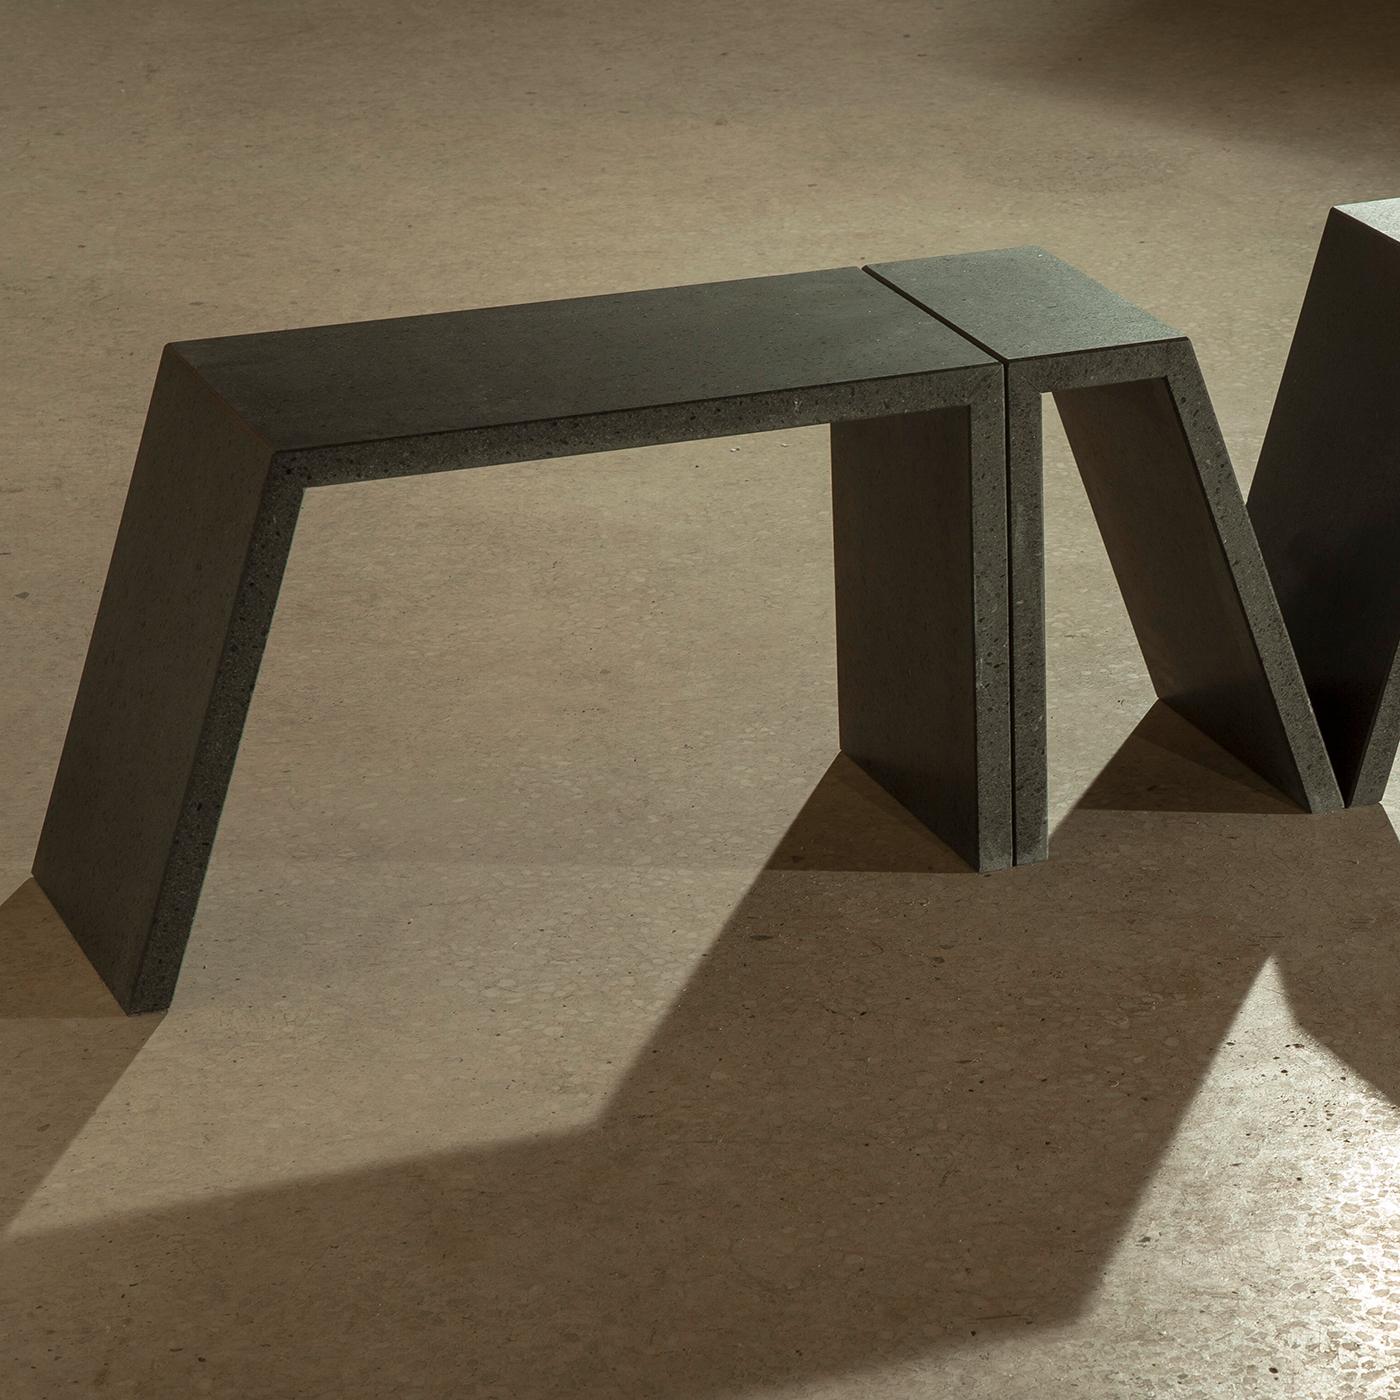 This refined contemporary coffee table fashioned of lava stone comprises modular elements that, together, create a geometric and elegant Silhouette. With an appearance that is at the same time light and playful, this piece is an easy addition to any